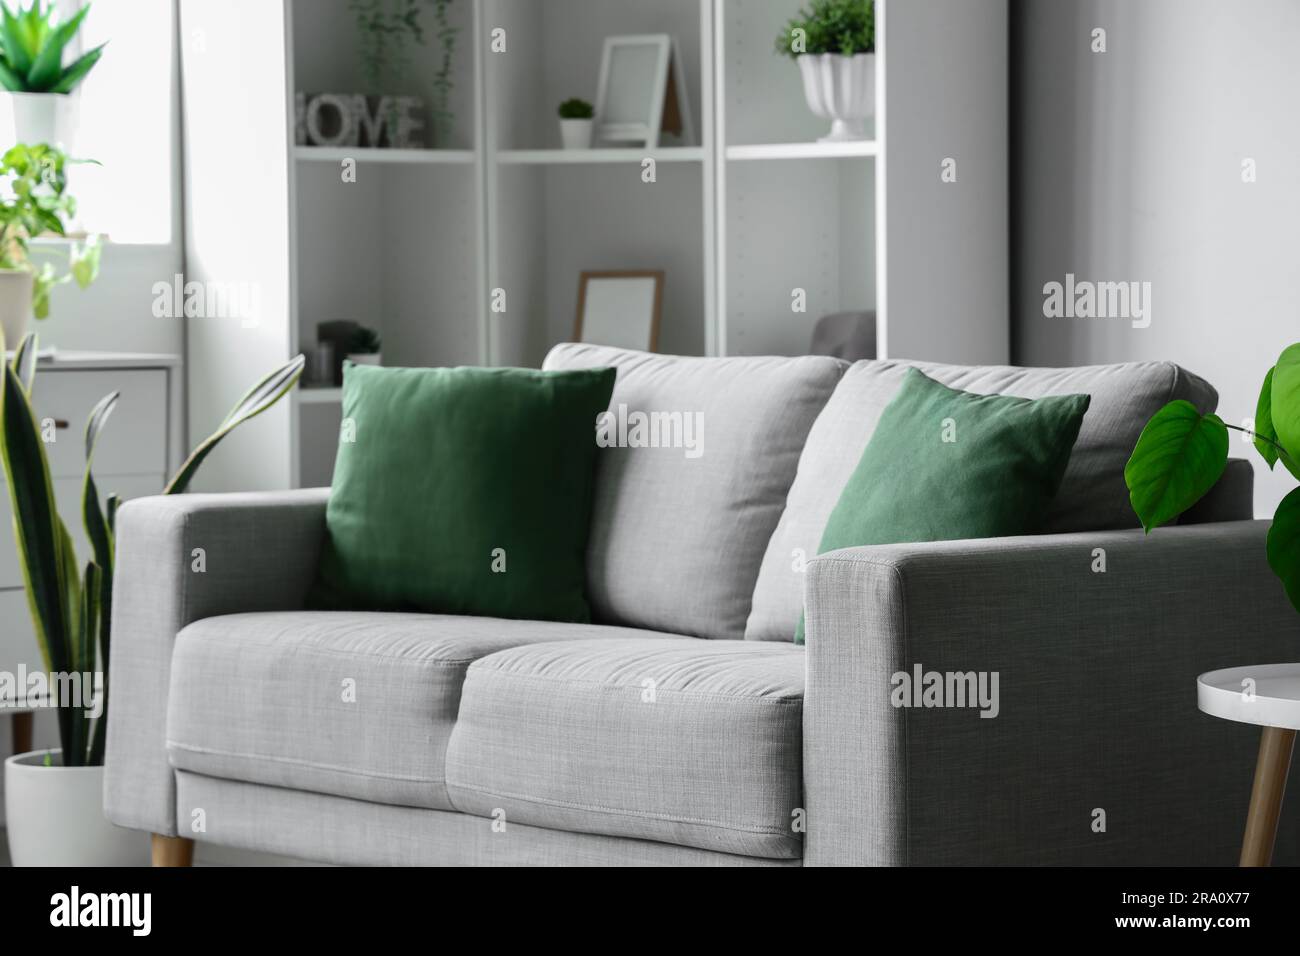 Cozy grey sofa with green cushions in interior of light living room Stock  Photo - Alamy